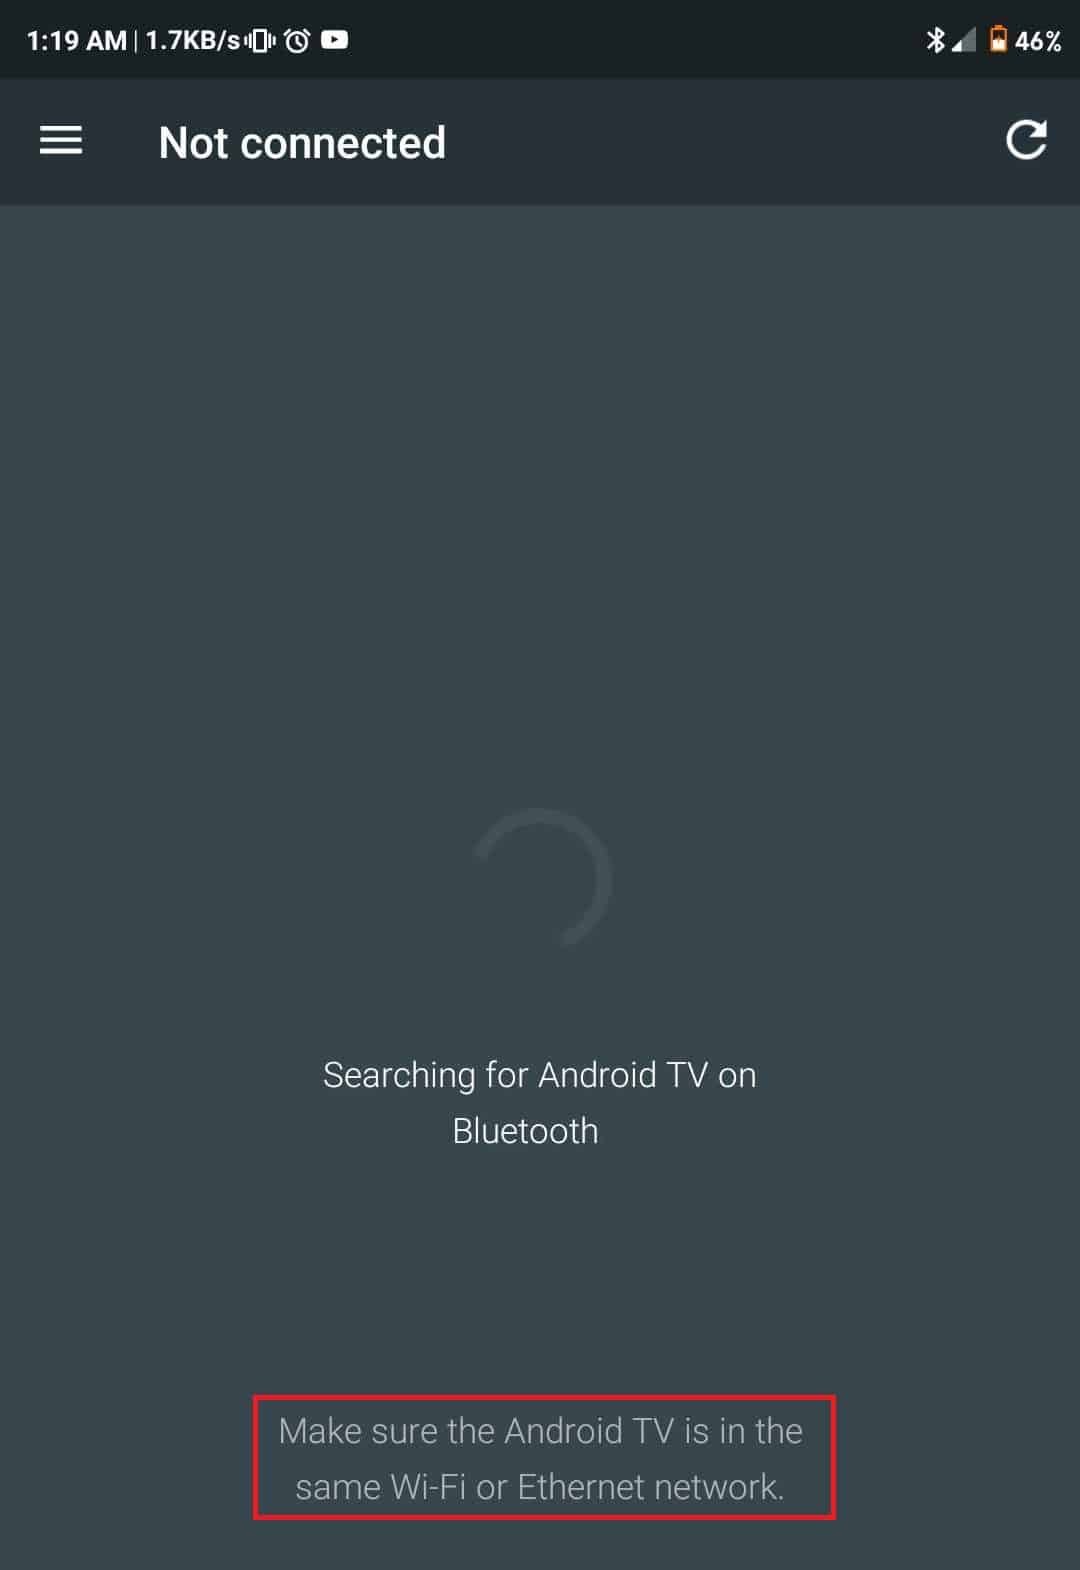 Open the Android TV Control App. You will notice an error message on your screen